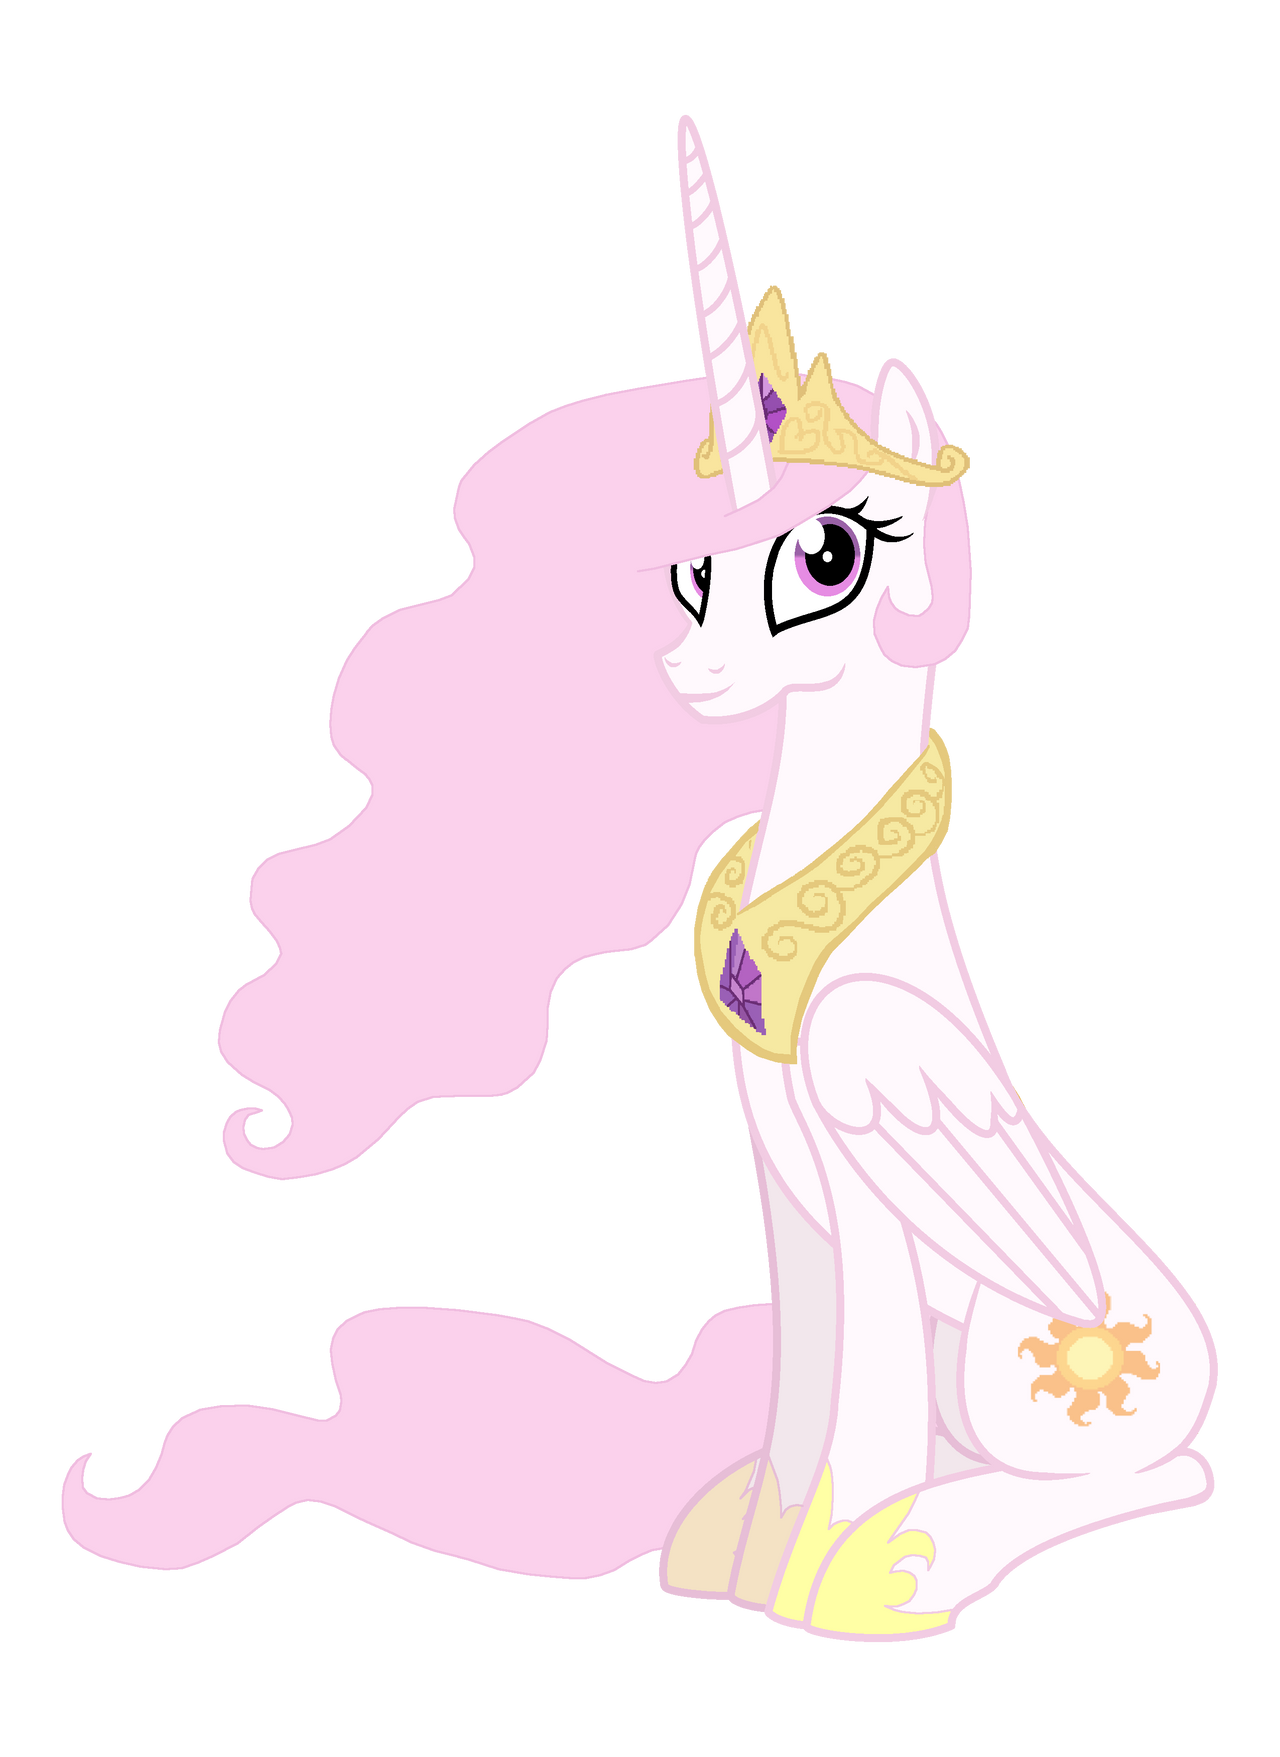 7 Princess Celestia (Young) by MLPstoryes on DeviantArt